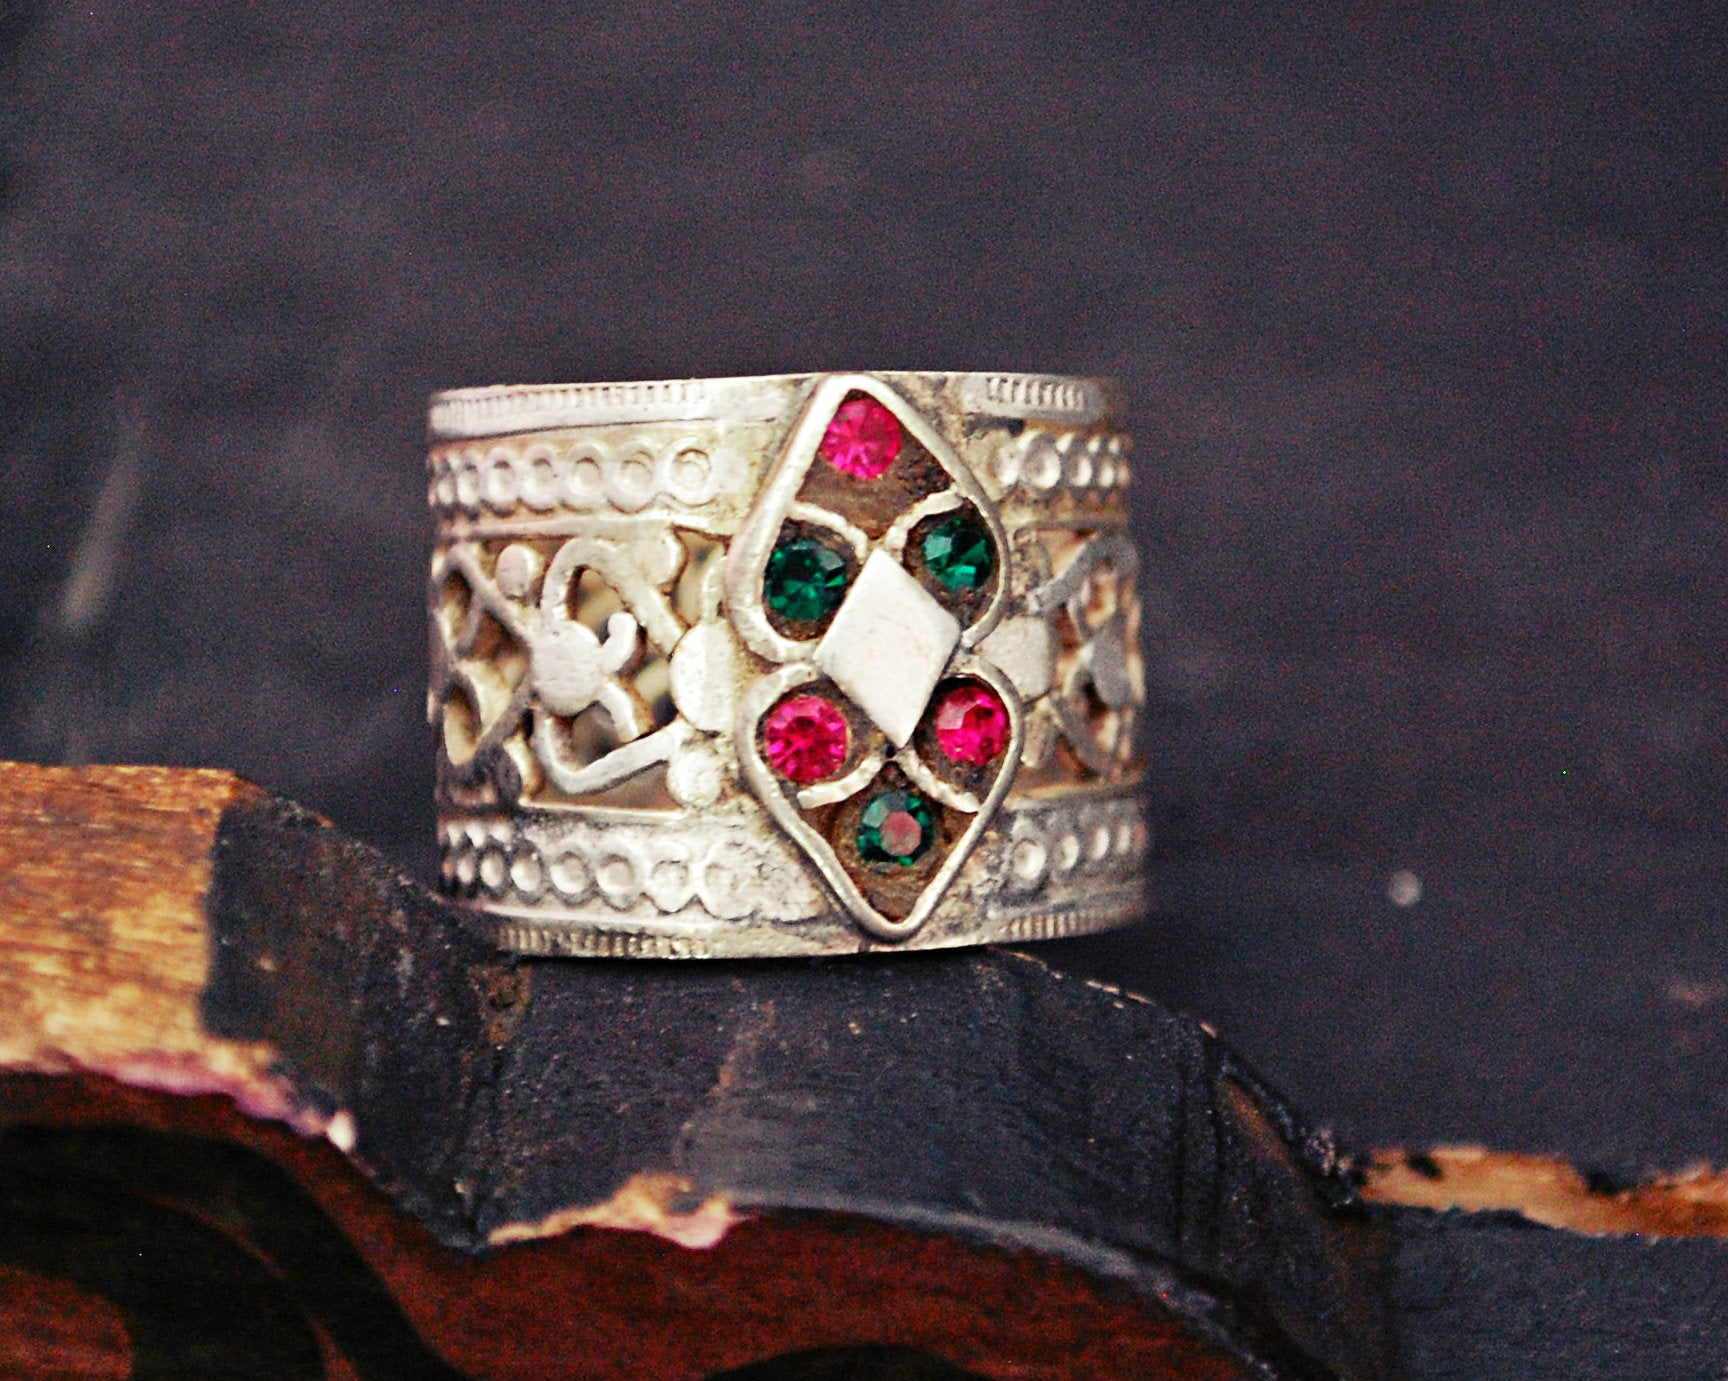 Antique Afghani Openwork Band Ring with Glass Stones - Size 8